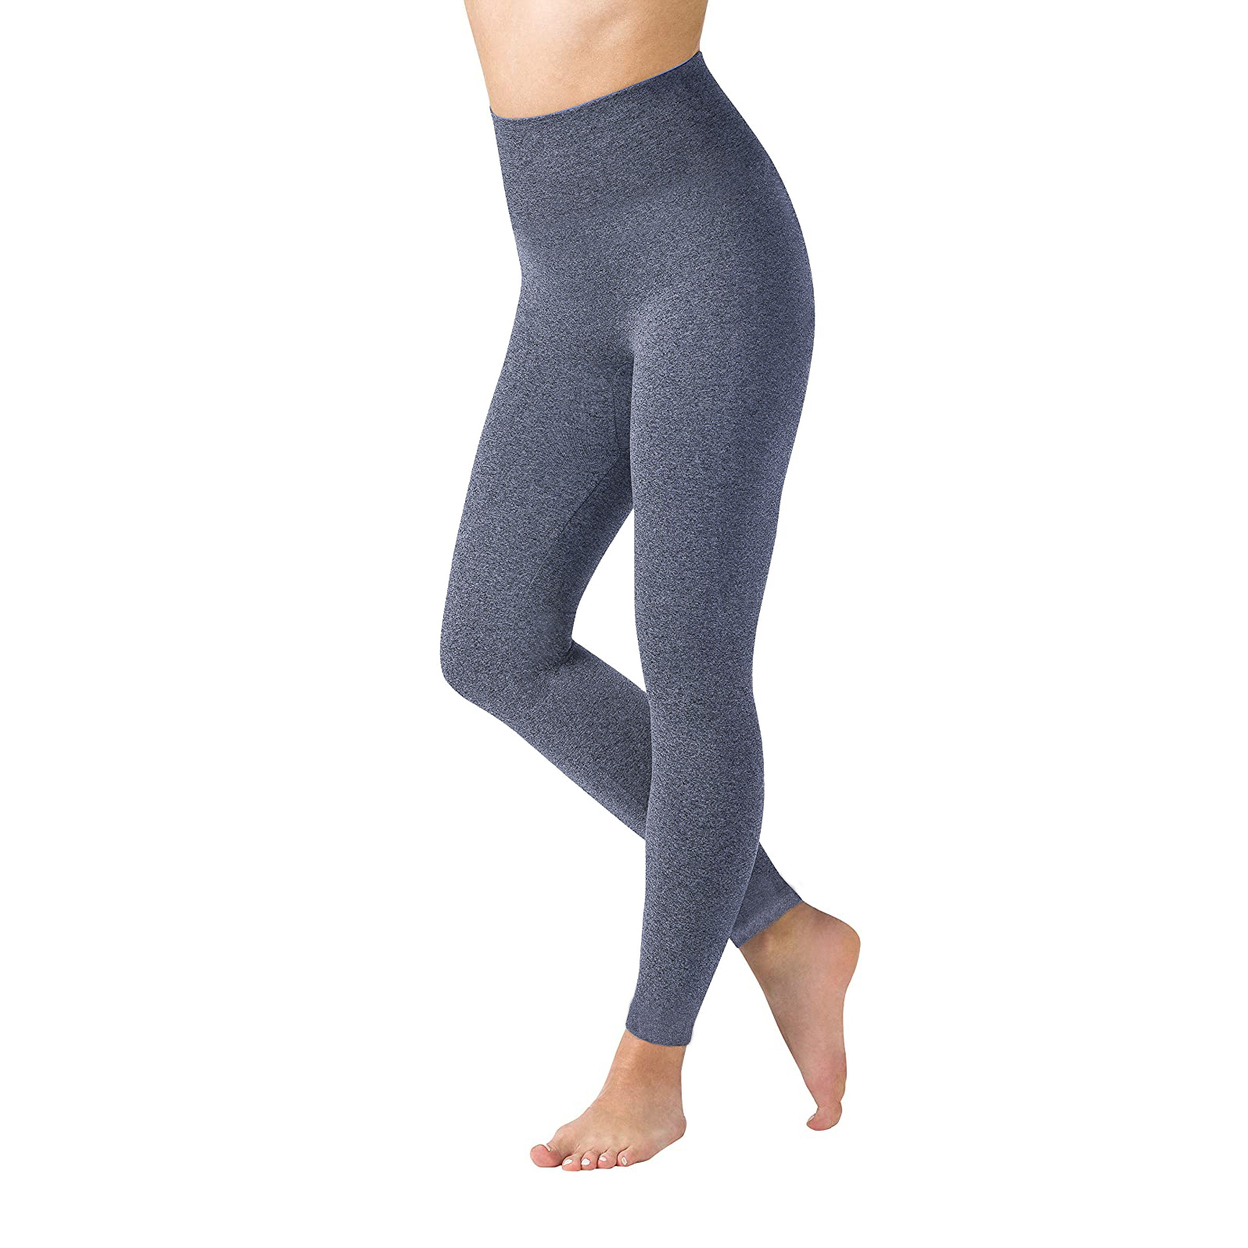 Women's High Waisted Ultra-Soft Fleece Lined Warm Marled Leggings(Available In Plus Sizes) - Navy, Small